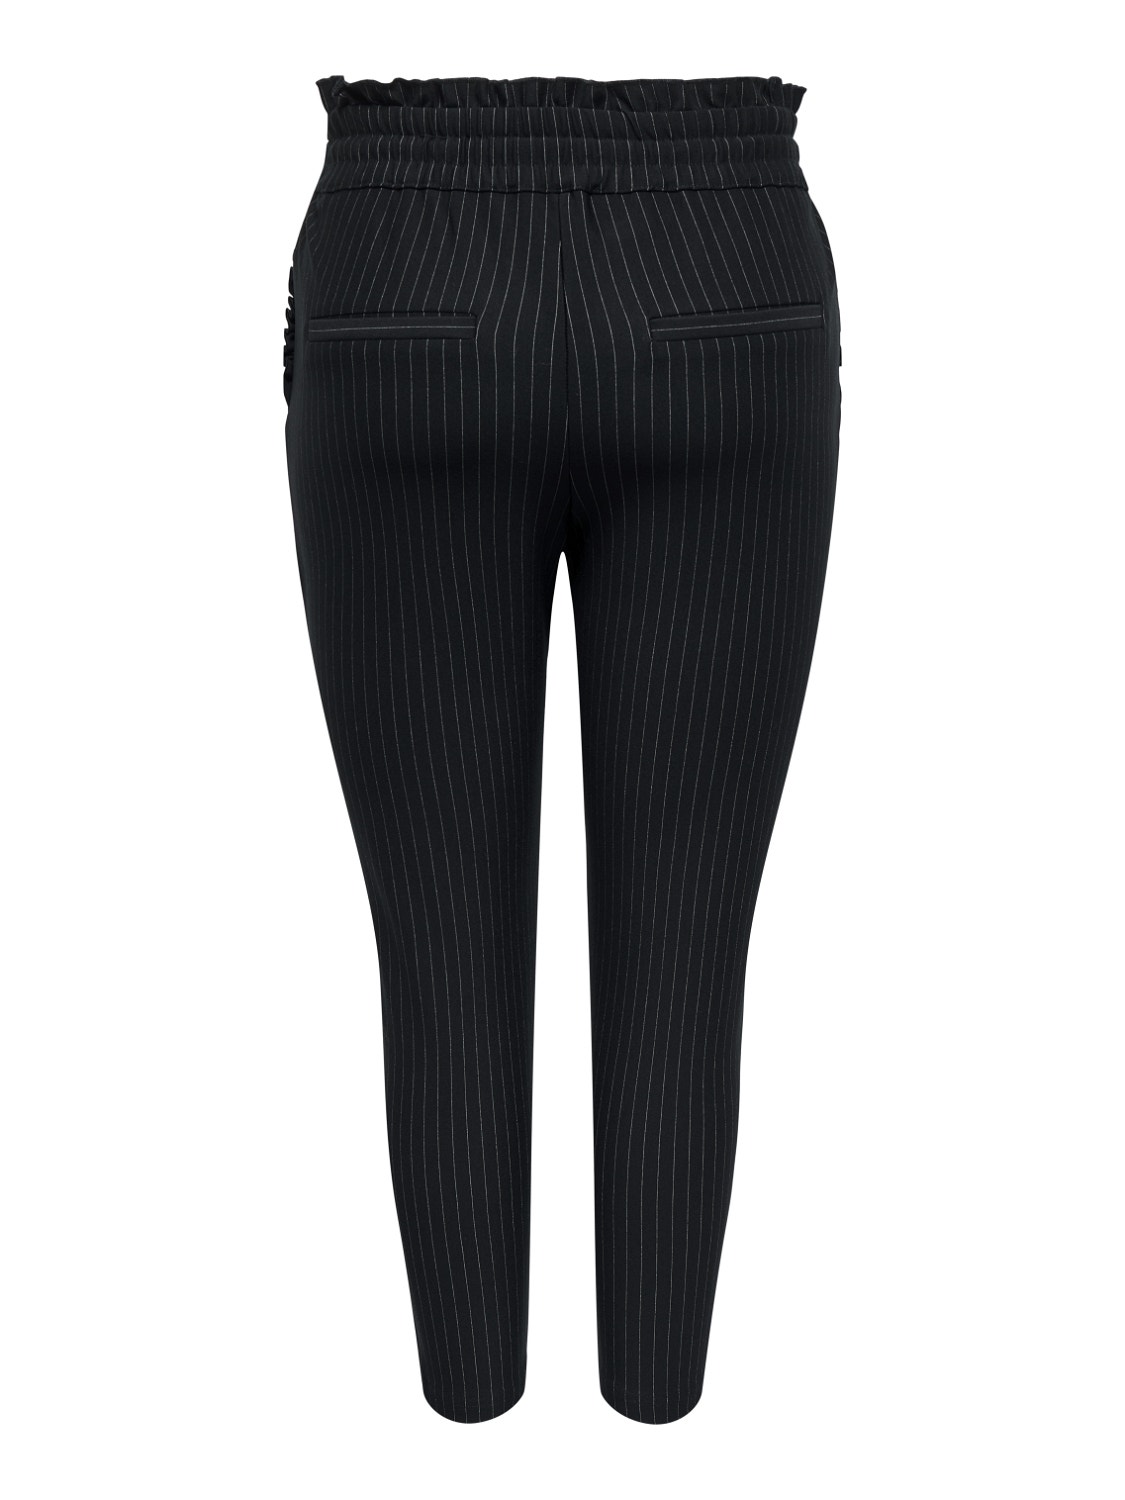 ONLY Trousers -Black - 15177939